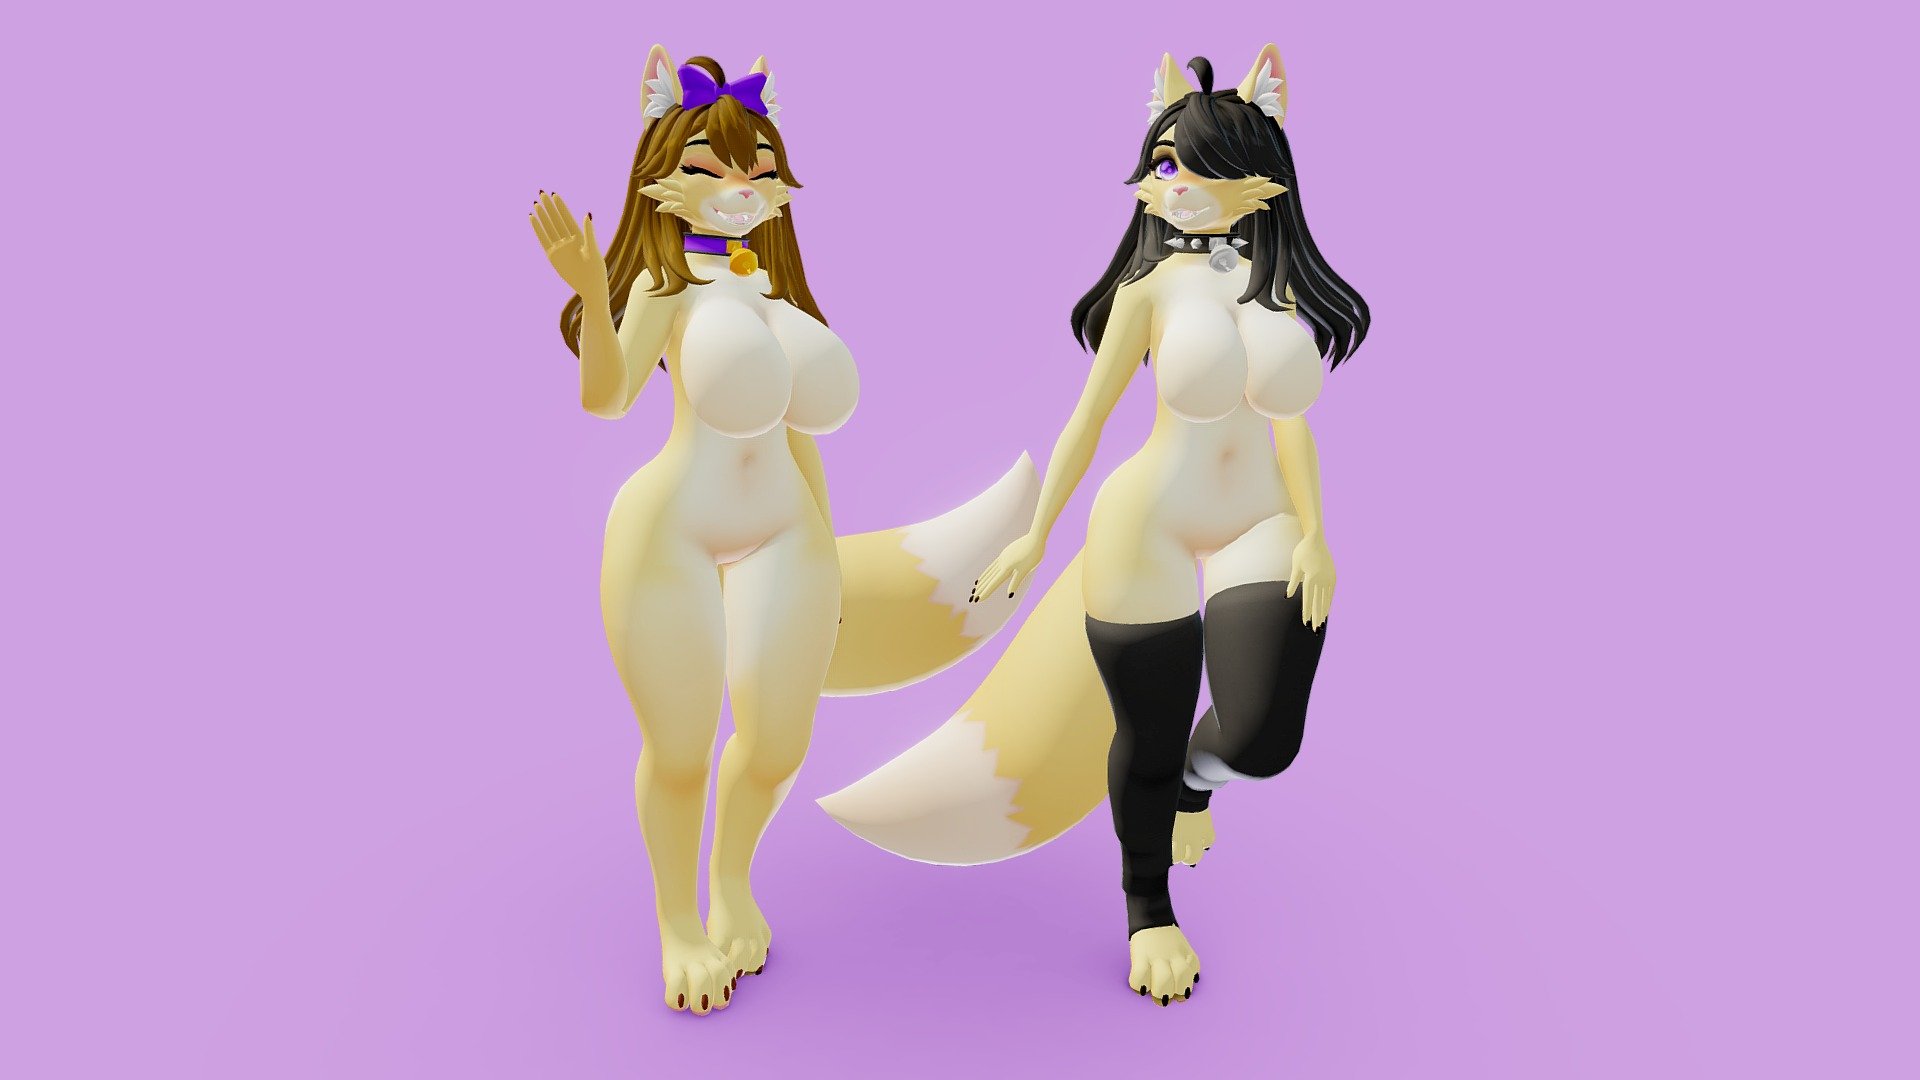 This is an avatar for VRChat that you can buy in my Gumroad store, the link to the store can be found among my networks in this other link: http://gelimimi.carrd.co
💞 My Twitter: https://twitter.com/GelimimiArt

💞 Discord Server: https://discord.gg/bRvdBe4Vm4

Commissions Info: http://gelimimi.carrd.co - Mei VRChat Avatar - 3D model by Gelimimi 3d model